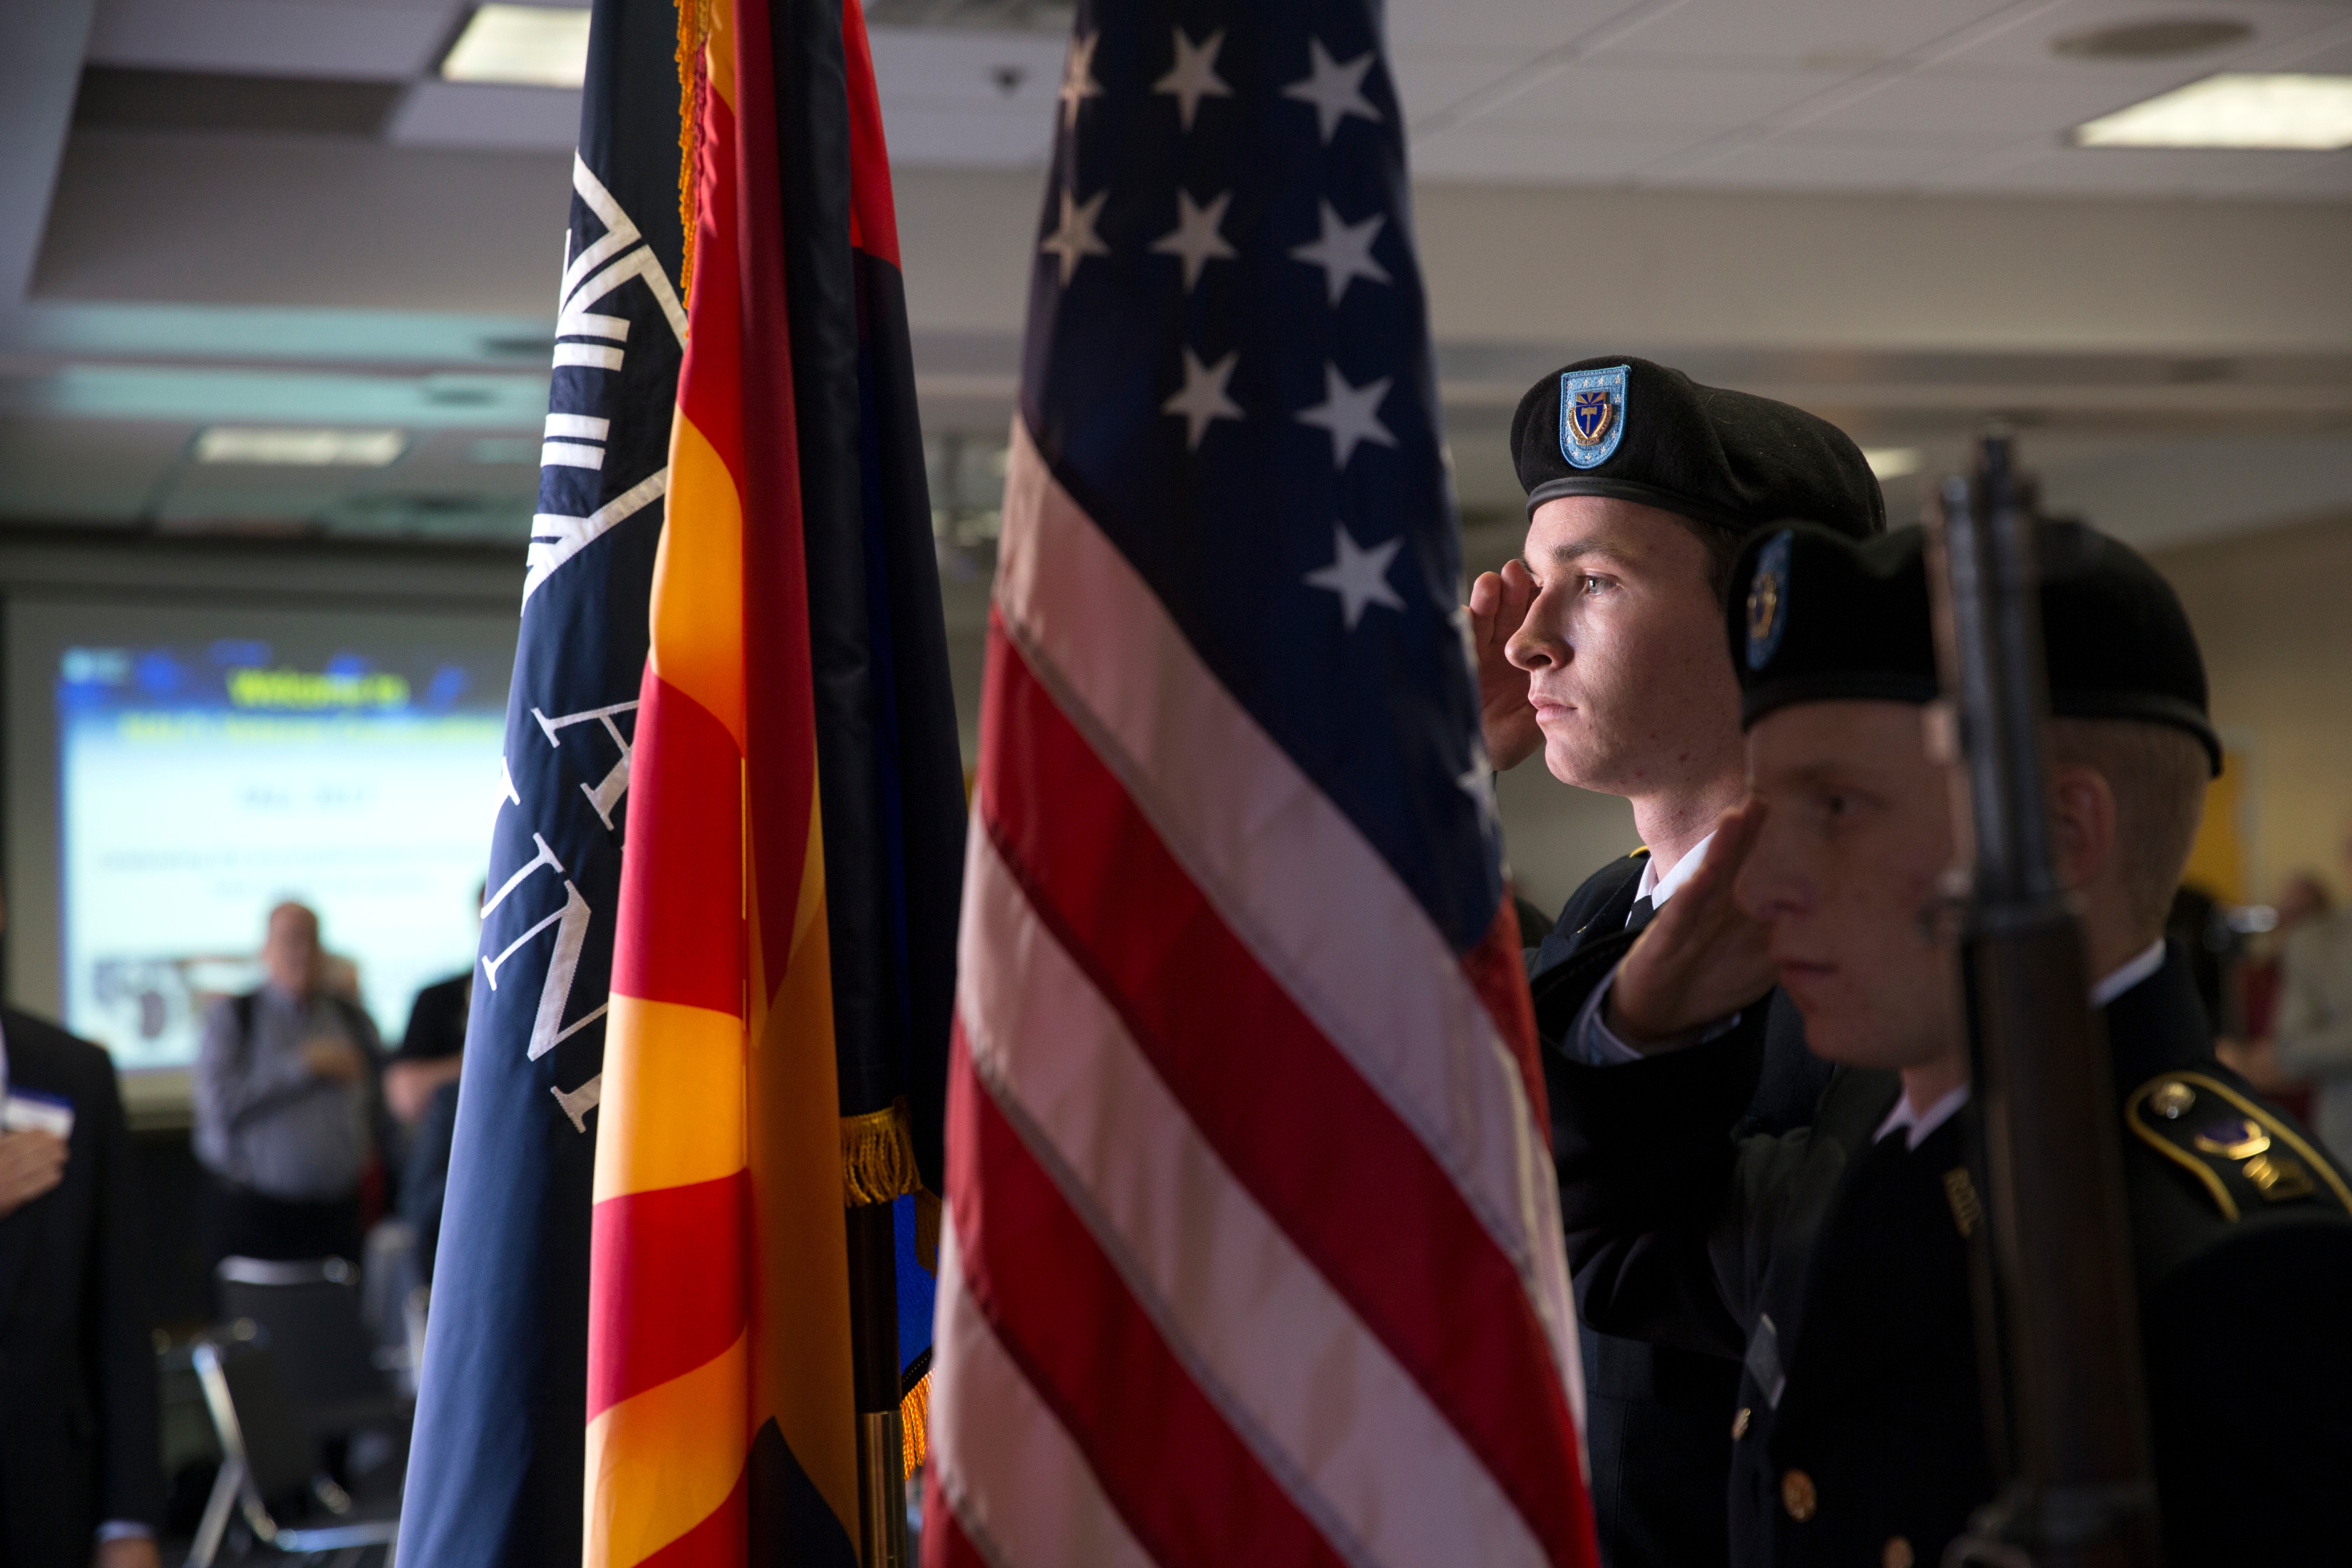 Military-affiliated students presenting flags in traditional military attire at a veterans' convocation event.